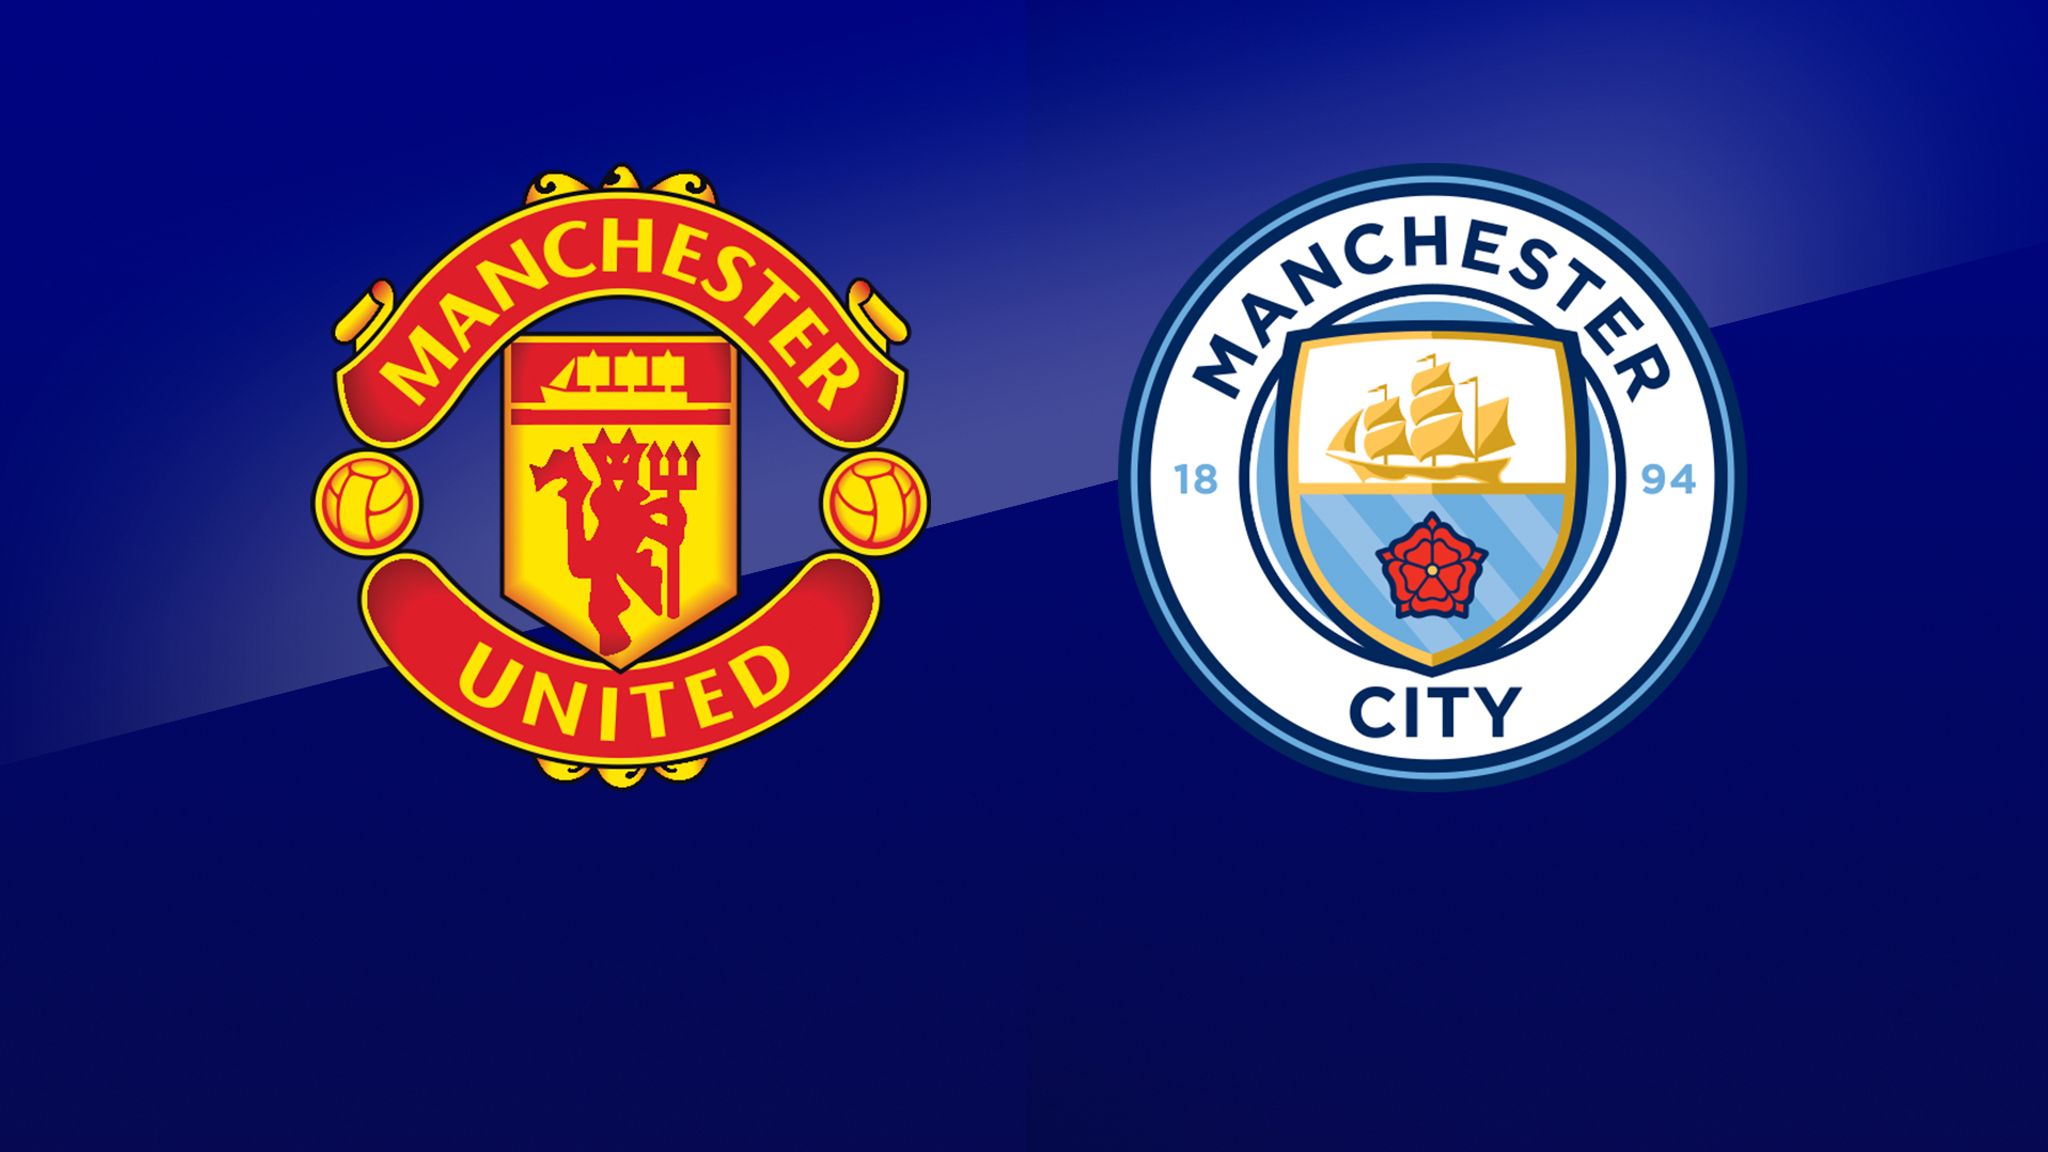 manchester united vs man city manchester derby kick off time how to watch live or stream with sky sports football news sky sports